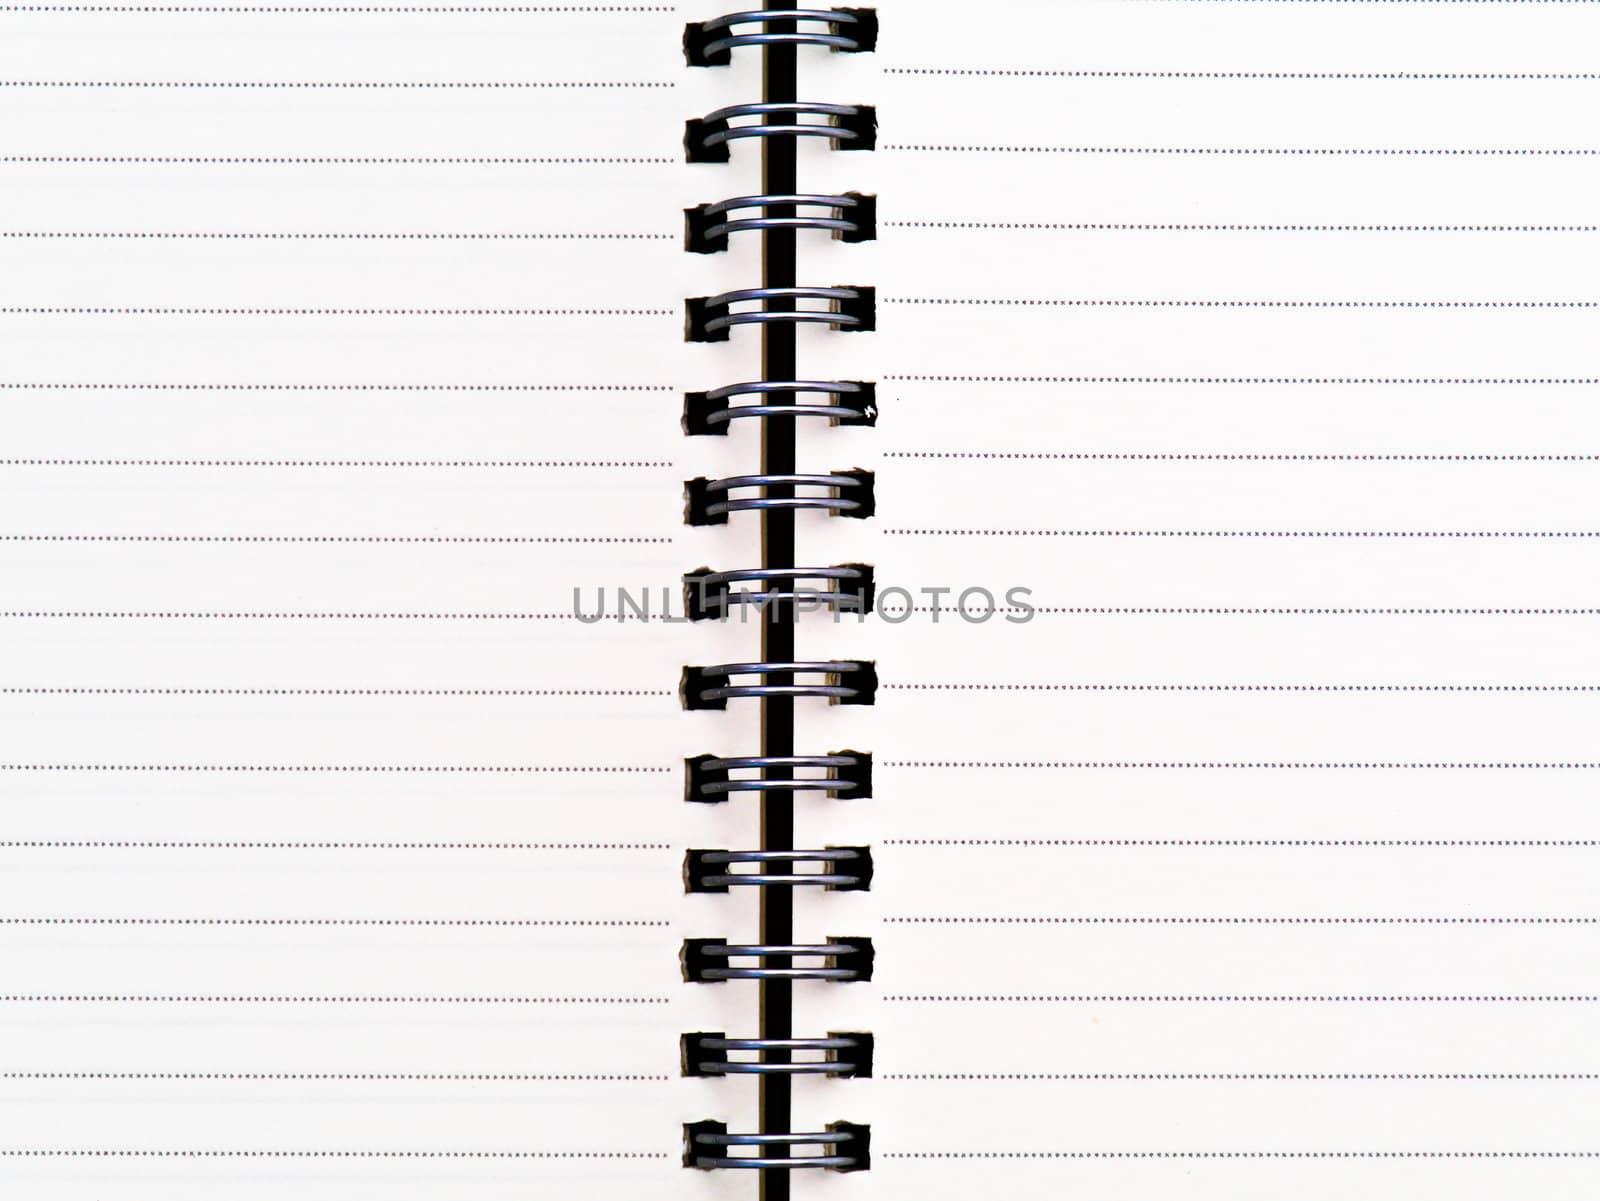 Blank one face white paper notebook horizontal by Noppharat_th